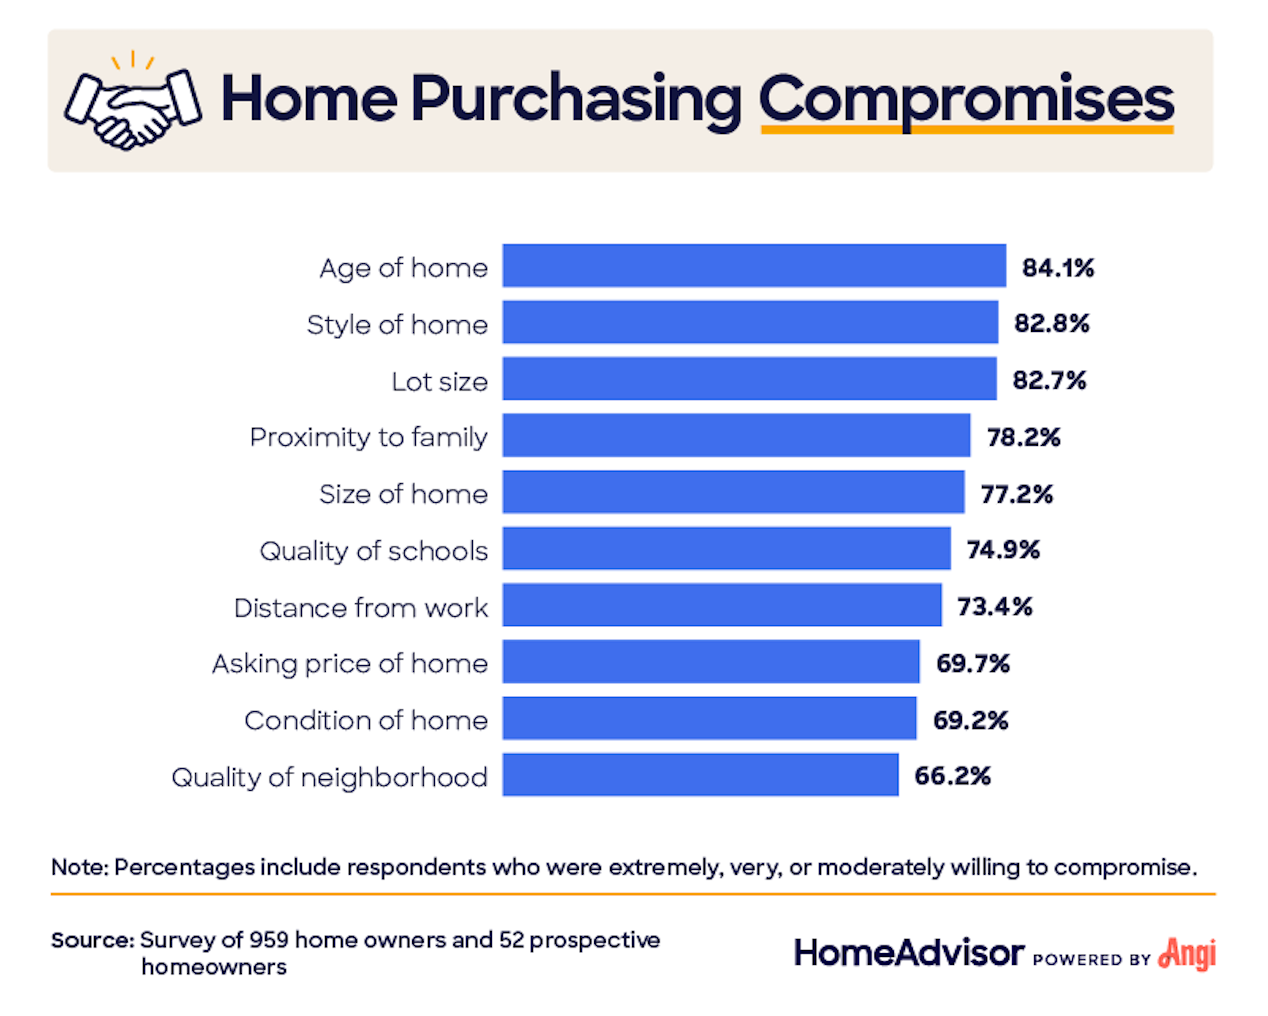 Home purchasing compromises